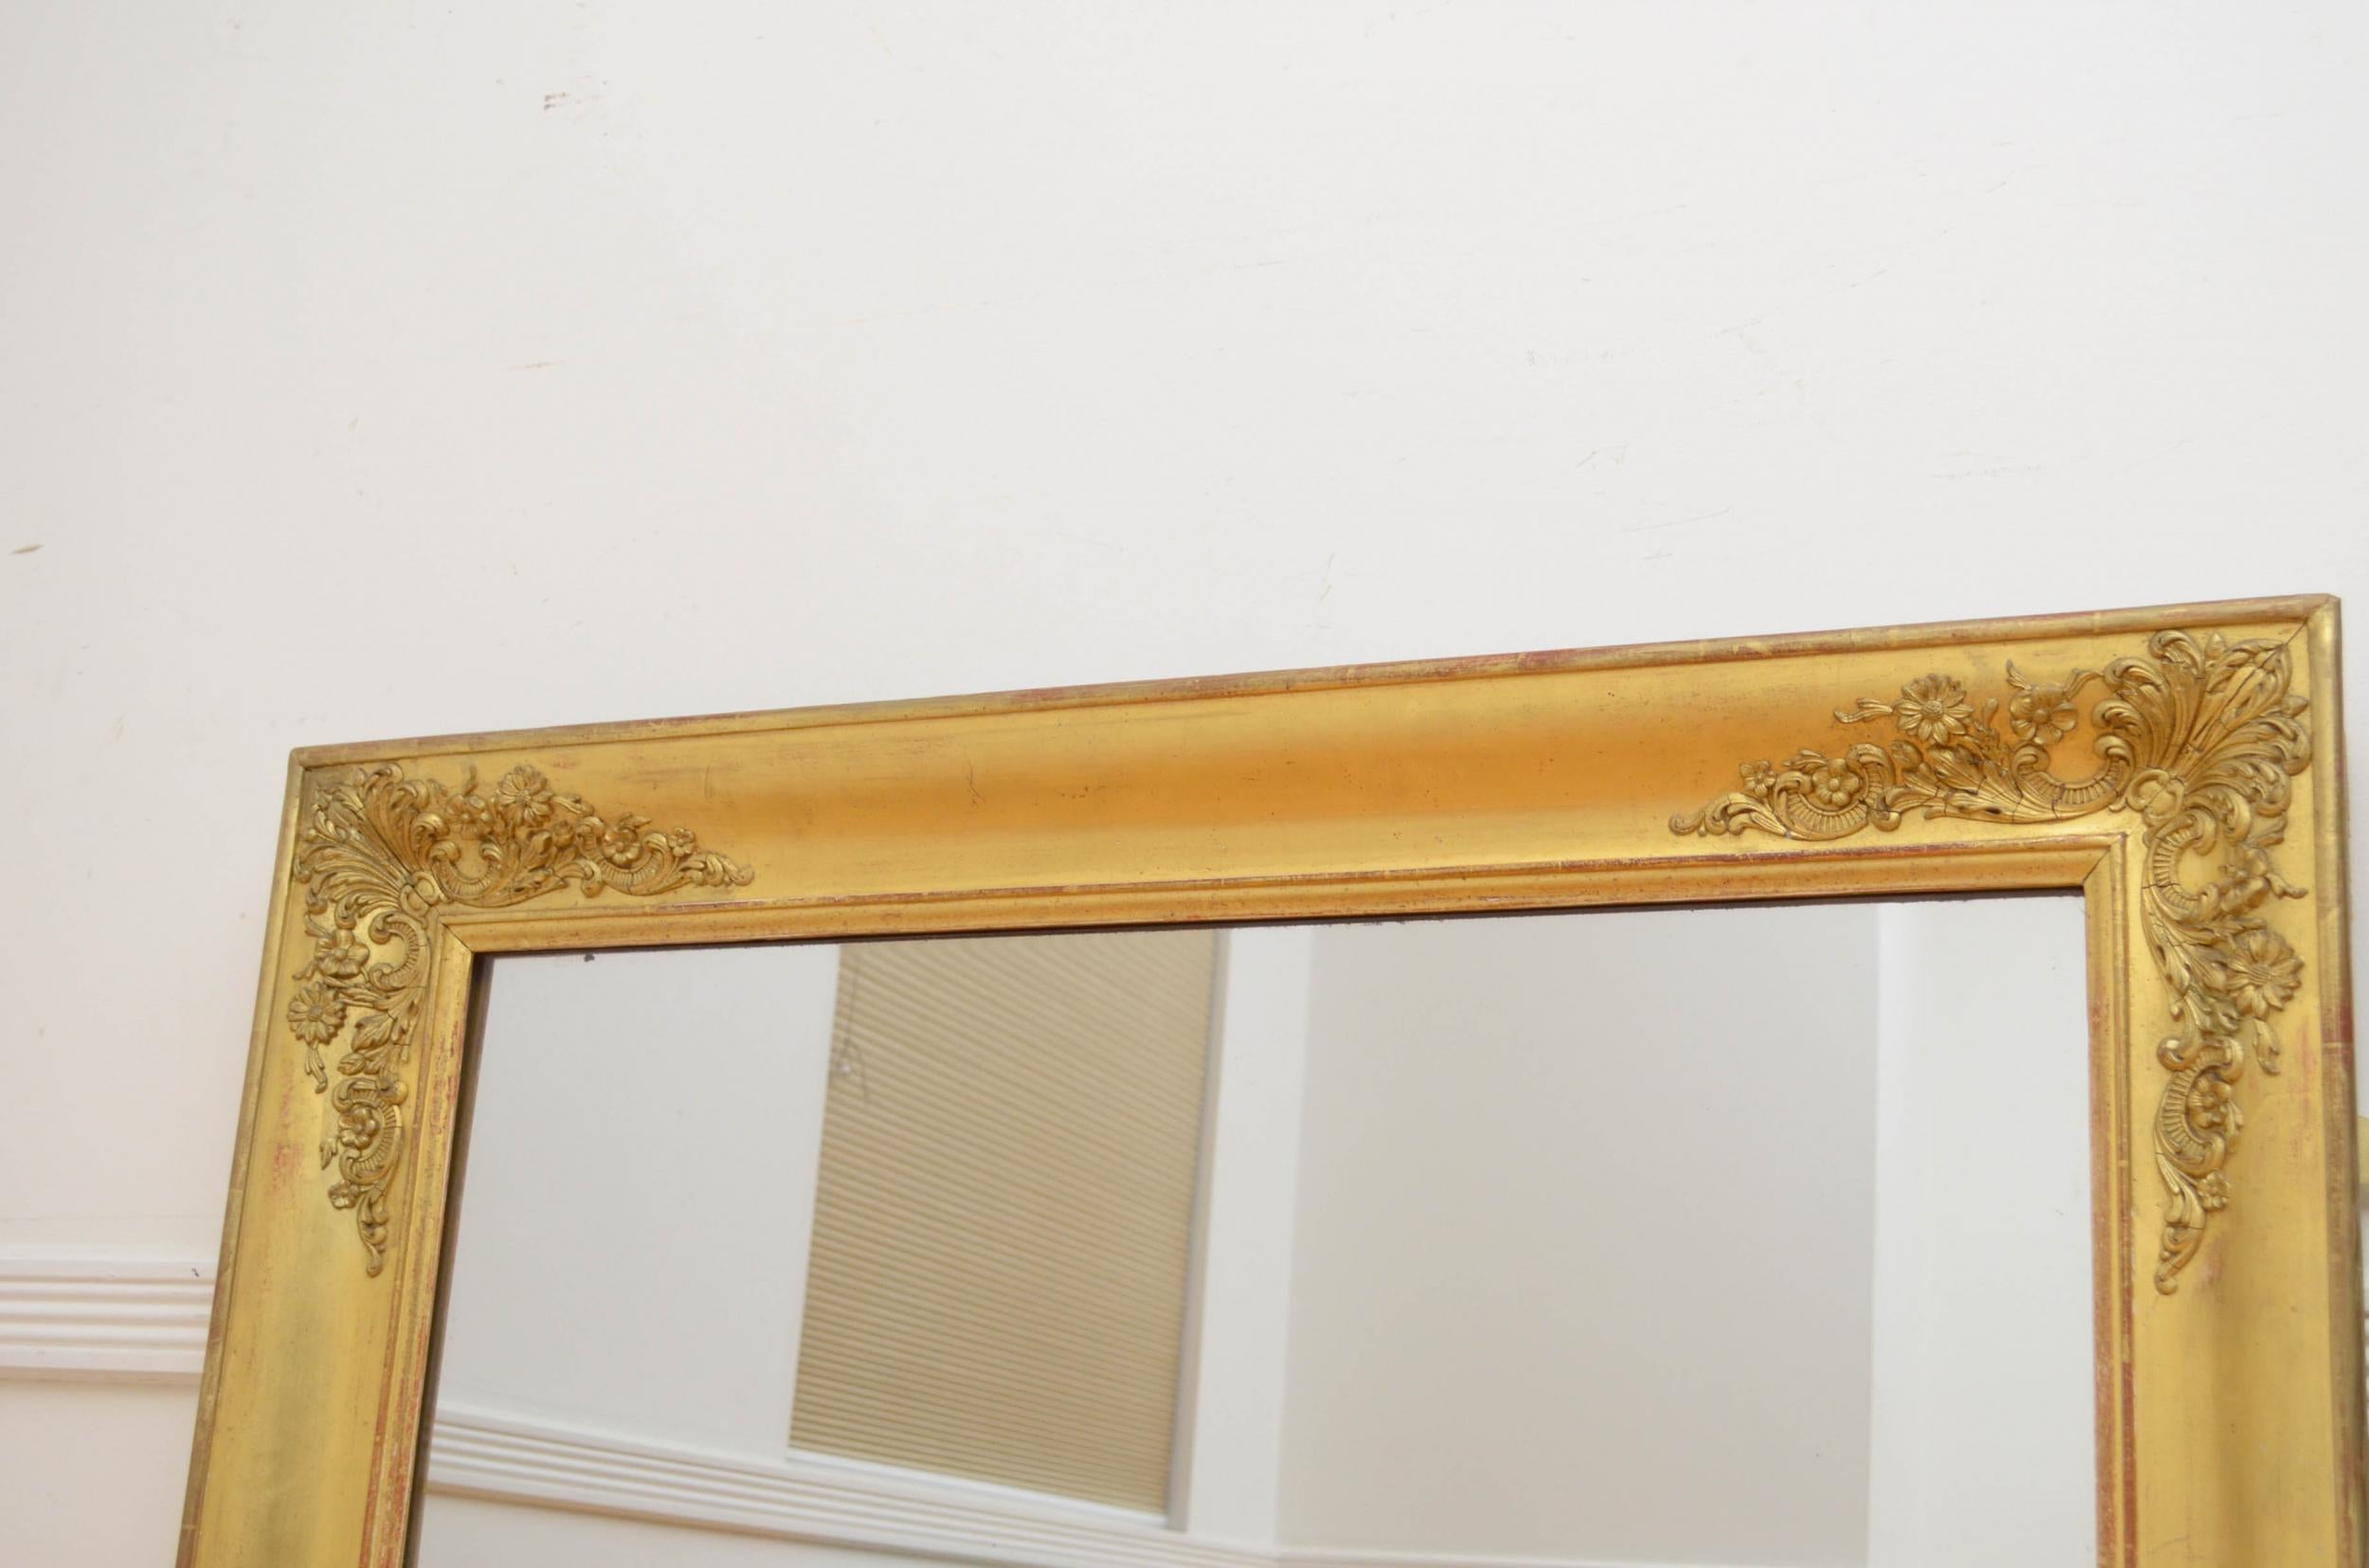 Attractive 19th Century French Giltwood Mirror In Good Condition For Sale In Whaley Bridge, GB